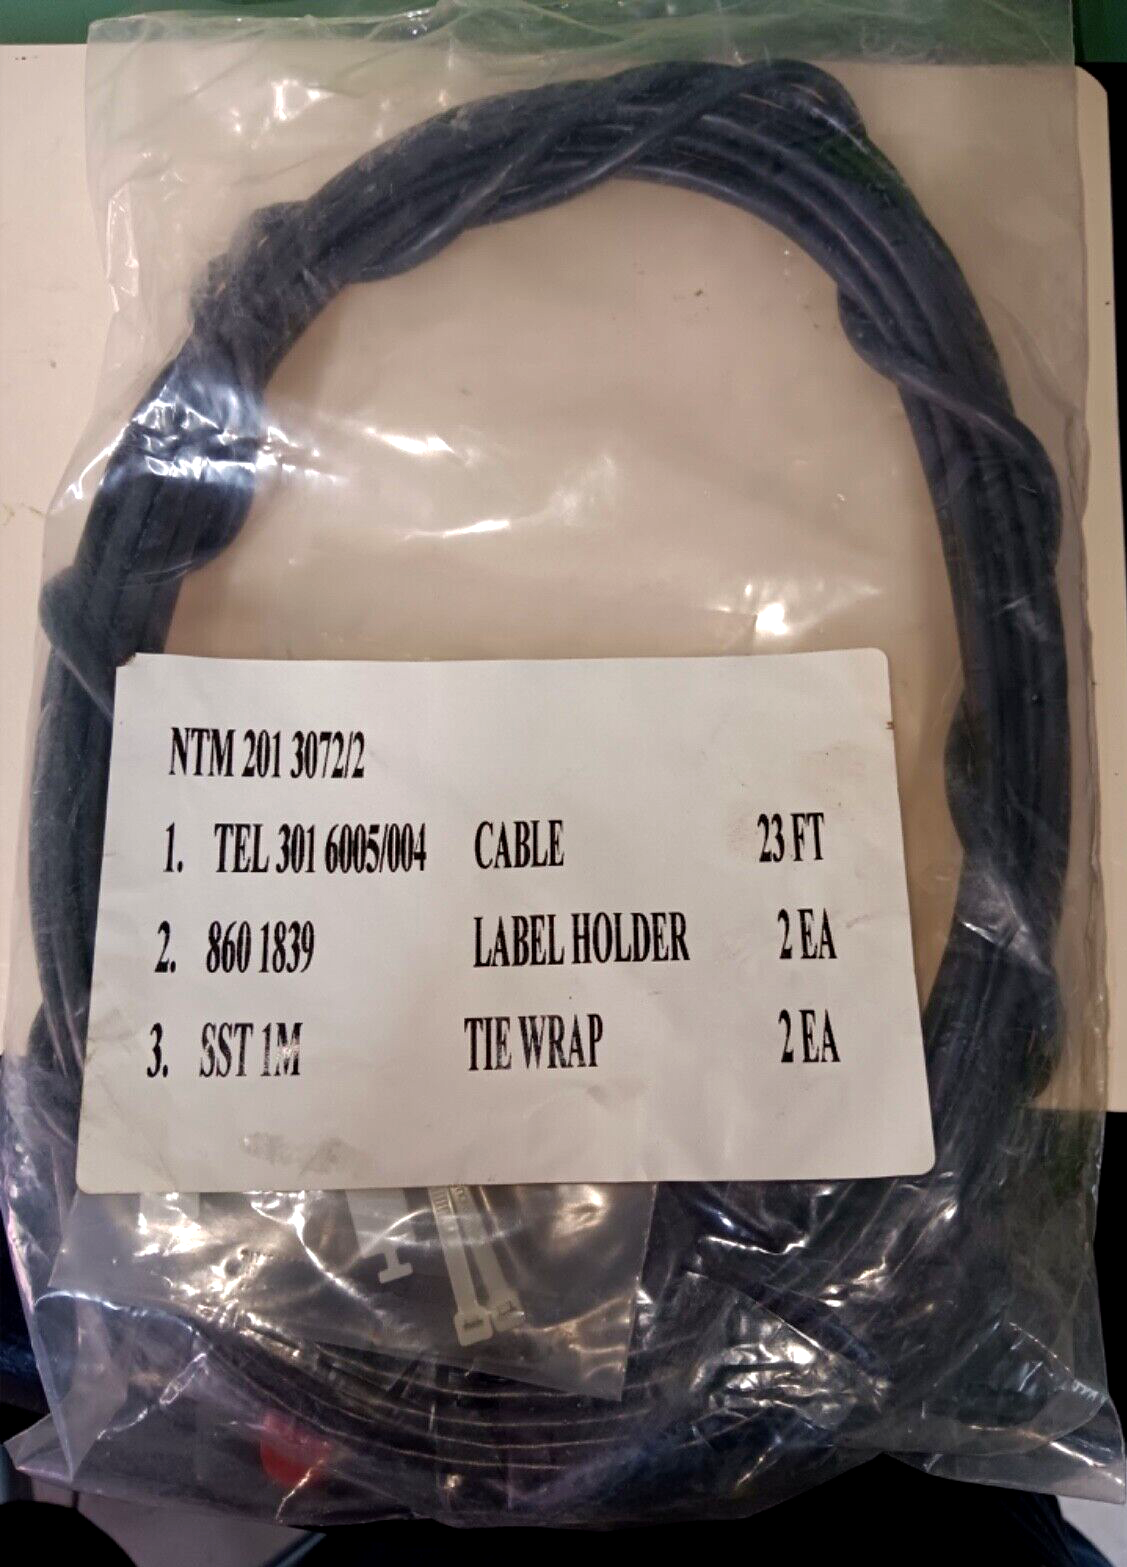 NTM2013072/2   NEW SIGNAL CABLE KIT  AS SHOWN IN PACKAGING ( SEE DESCRIPTION )